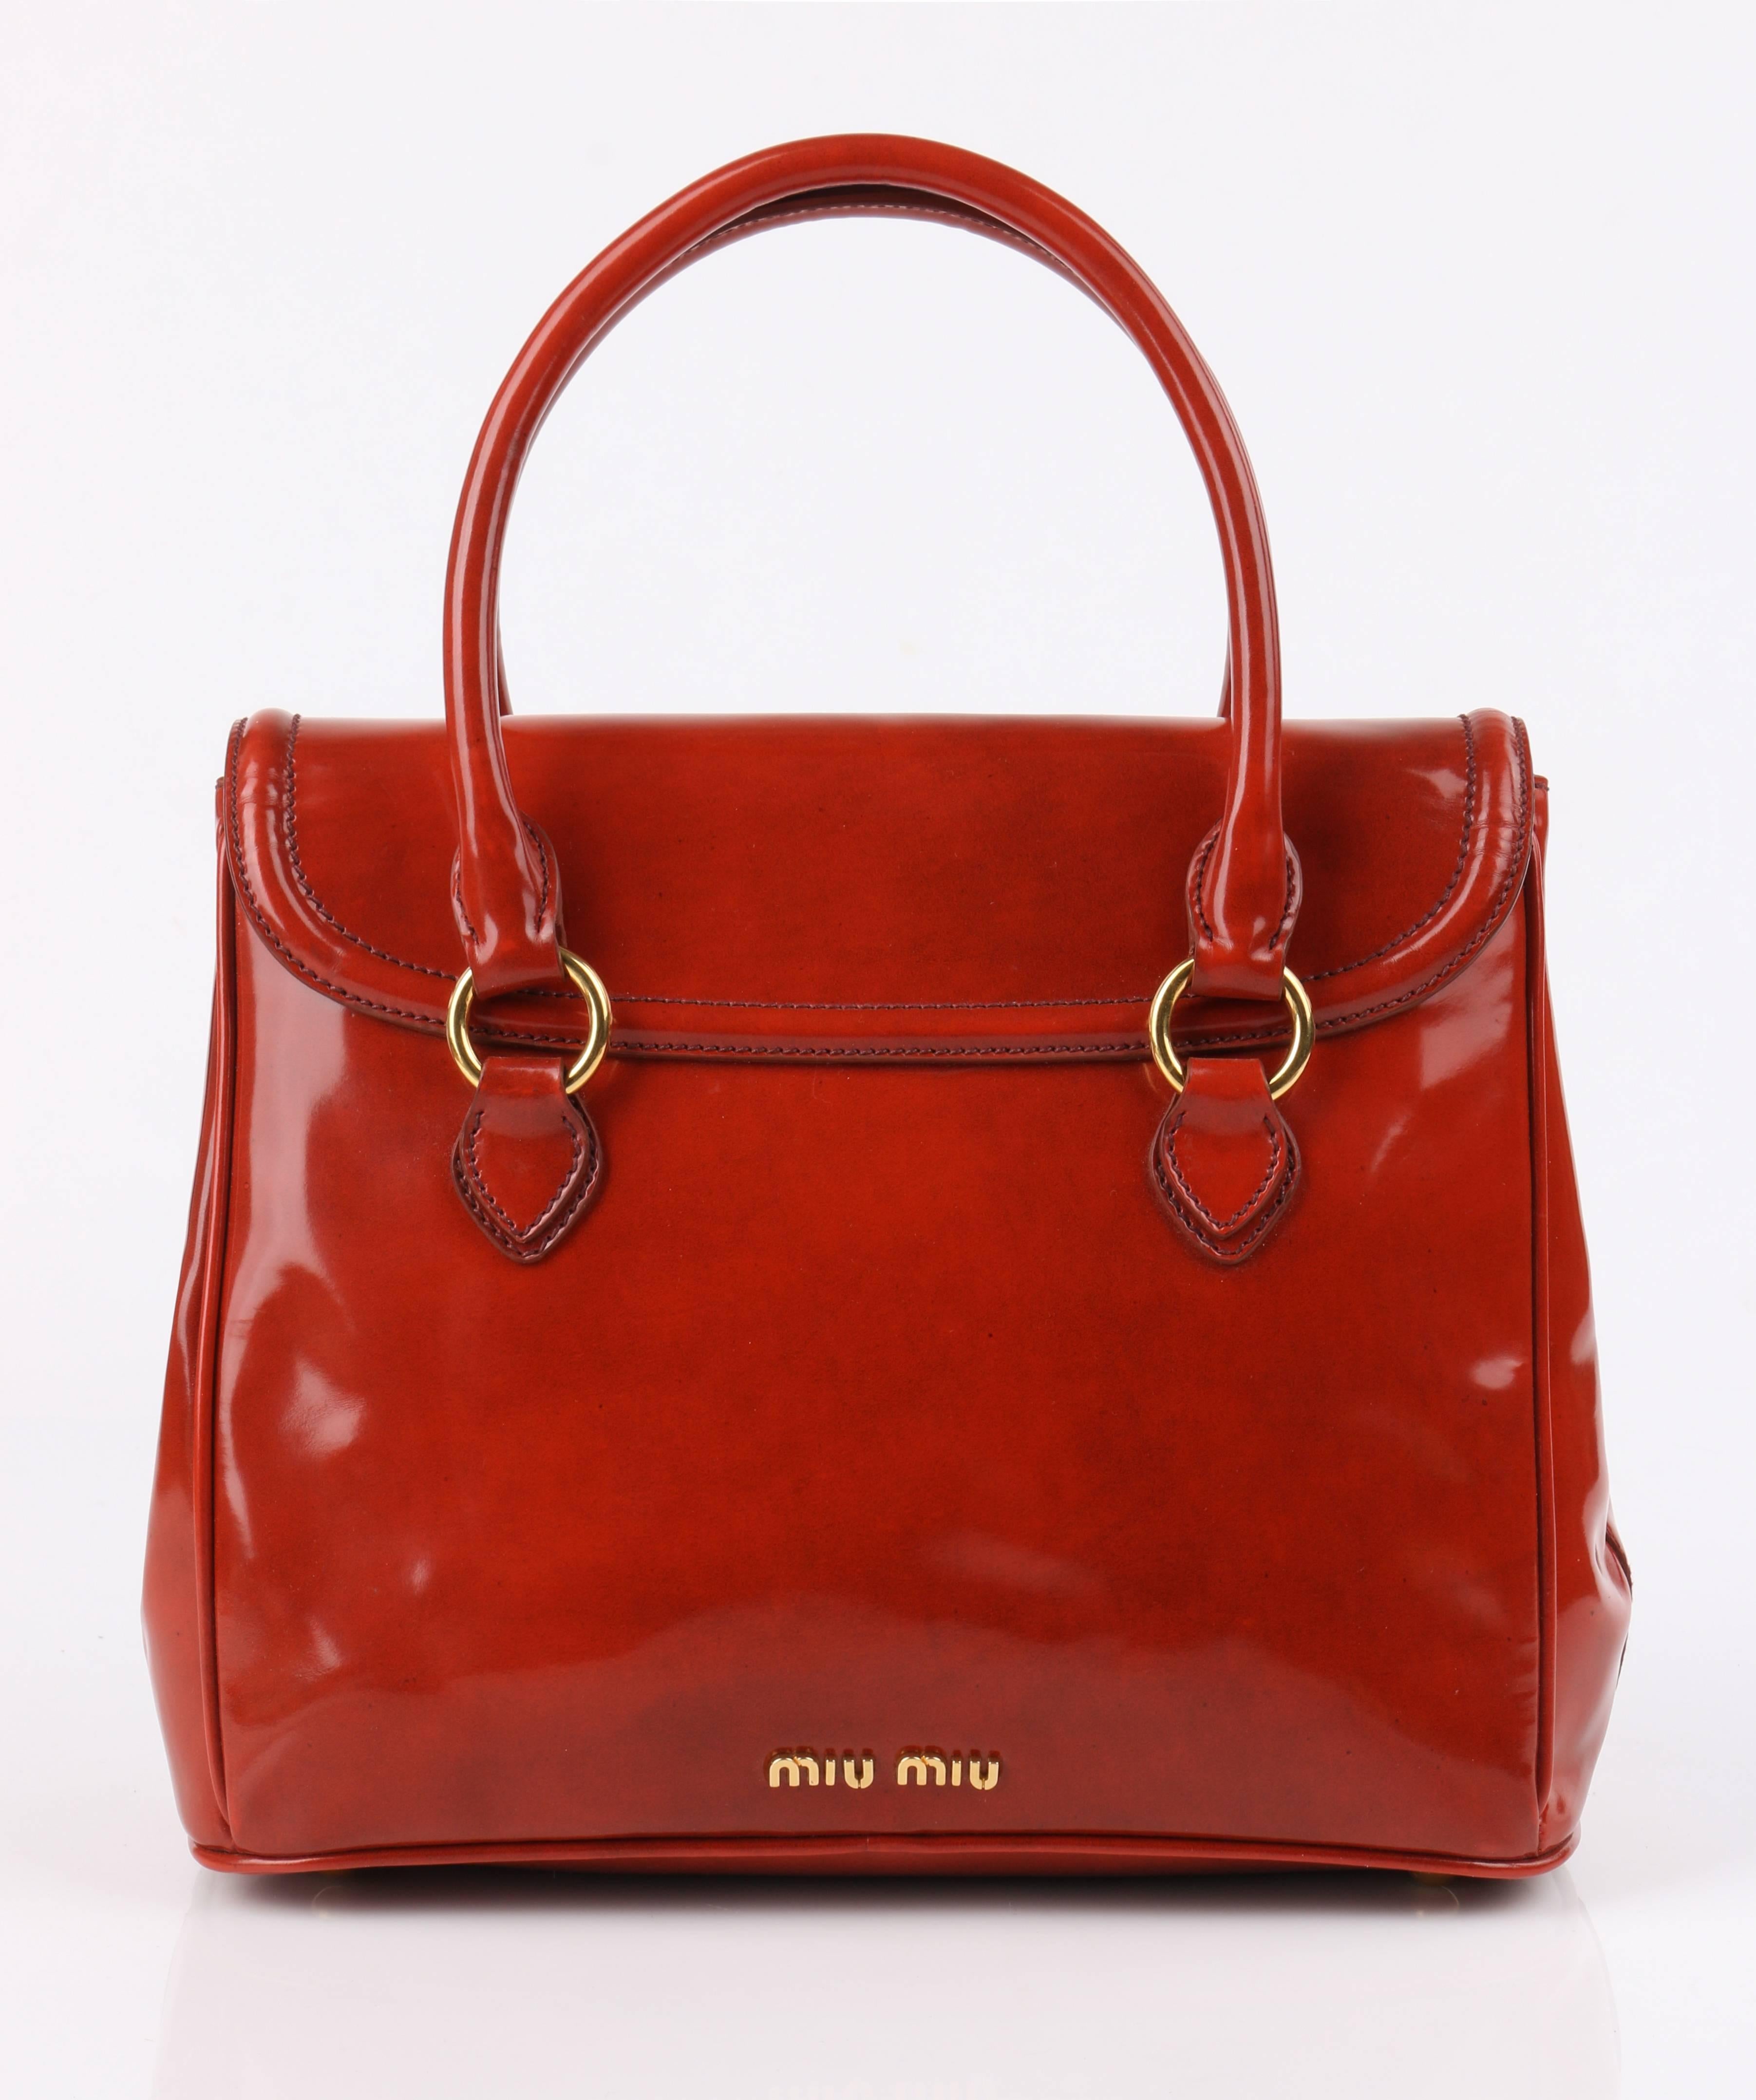 Miu Miu Prada Autumn / Winter 2012 burnt orange spazzolato (polished/patent) leather purse. Designed by Miuccia Prada. Burnt orange spazzolato exterior with piping detail. Flap top with gold-toned metal slide lock closure. Two single rolled handles